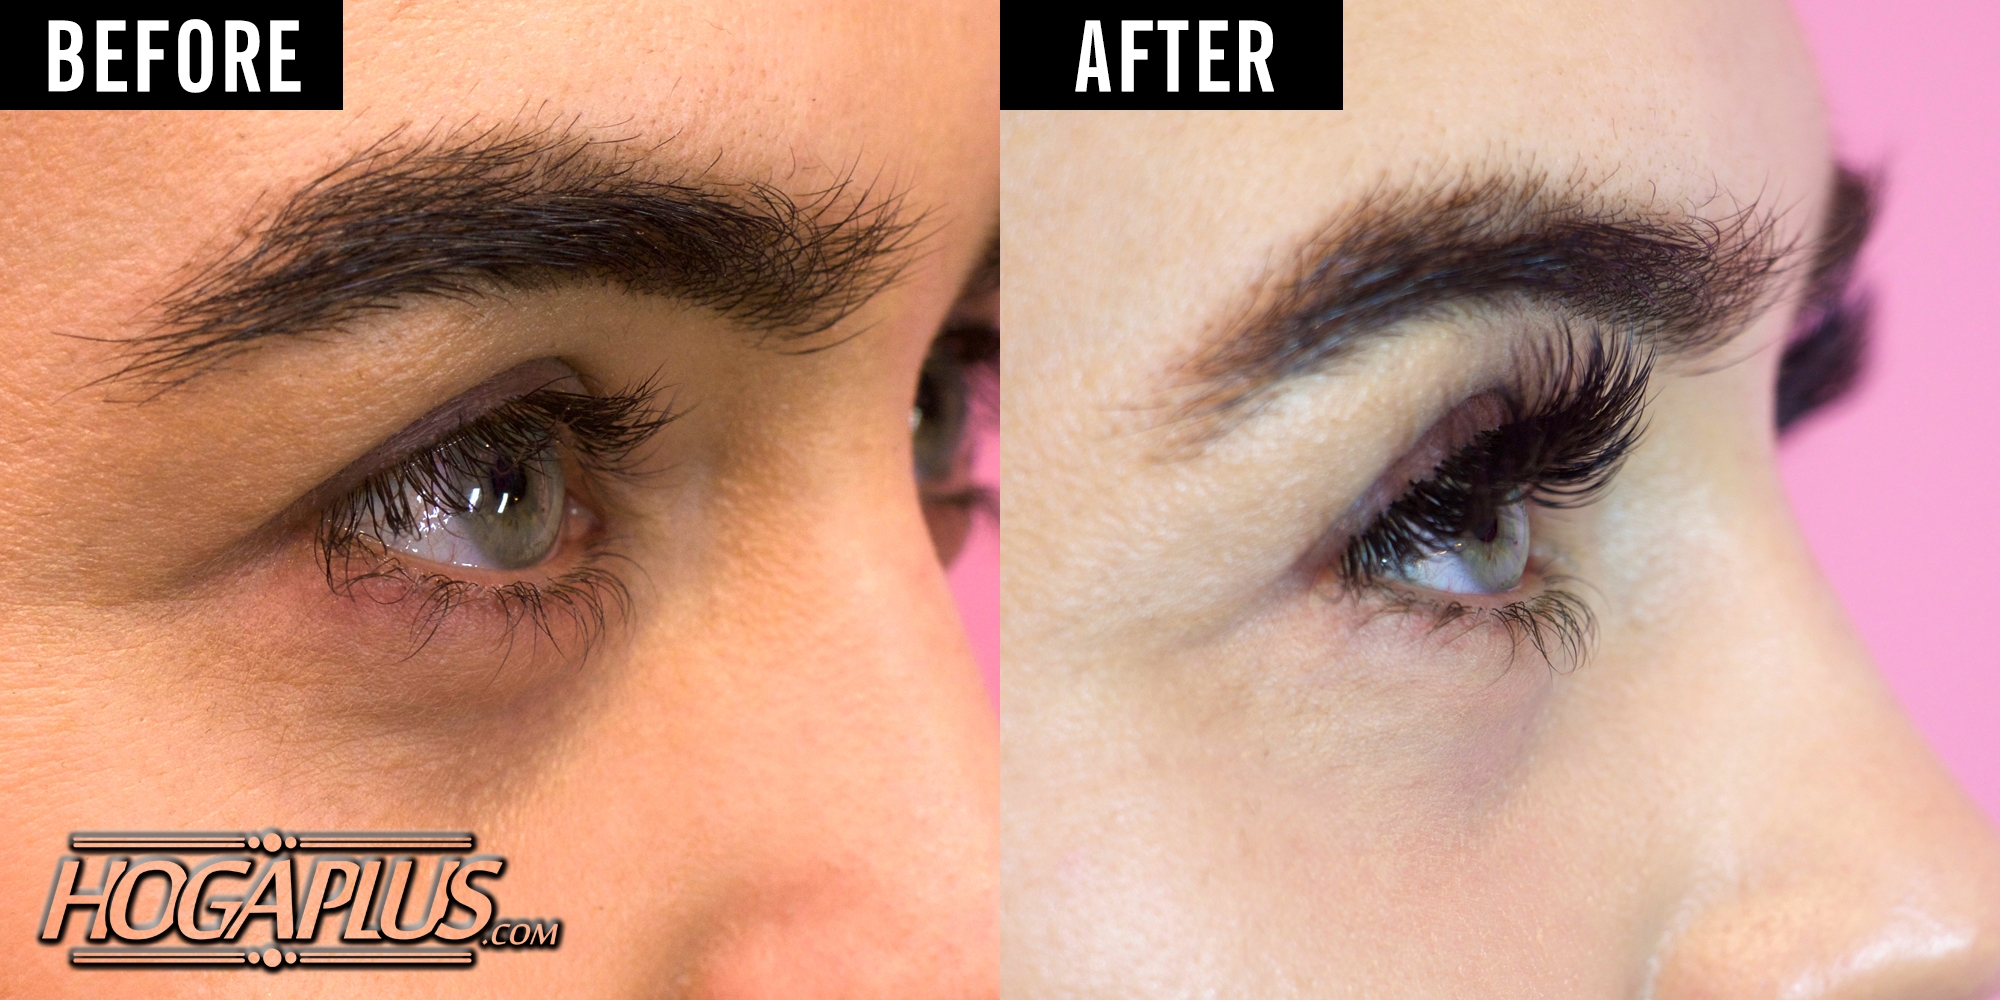 Beauty Tips for getting eyelash extensions